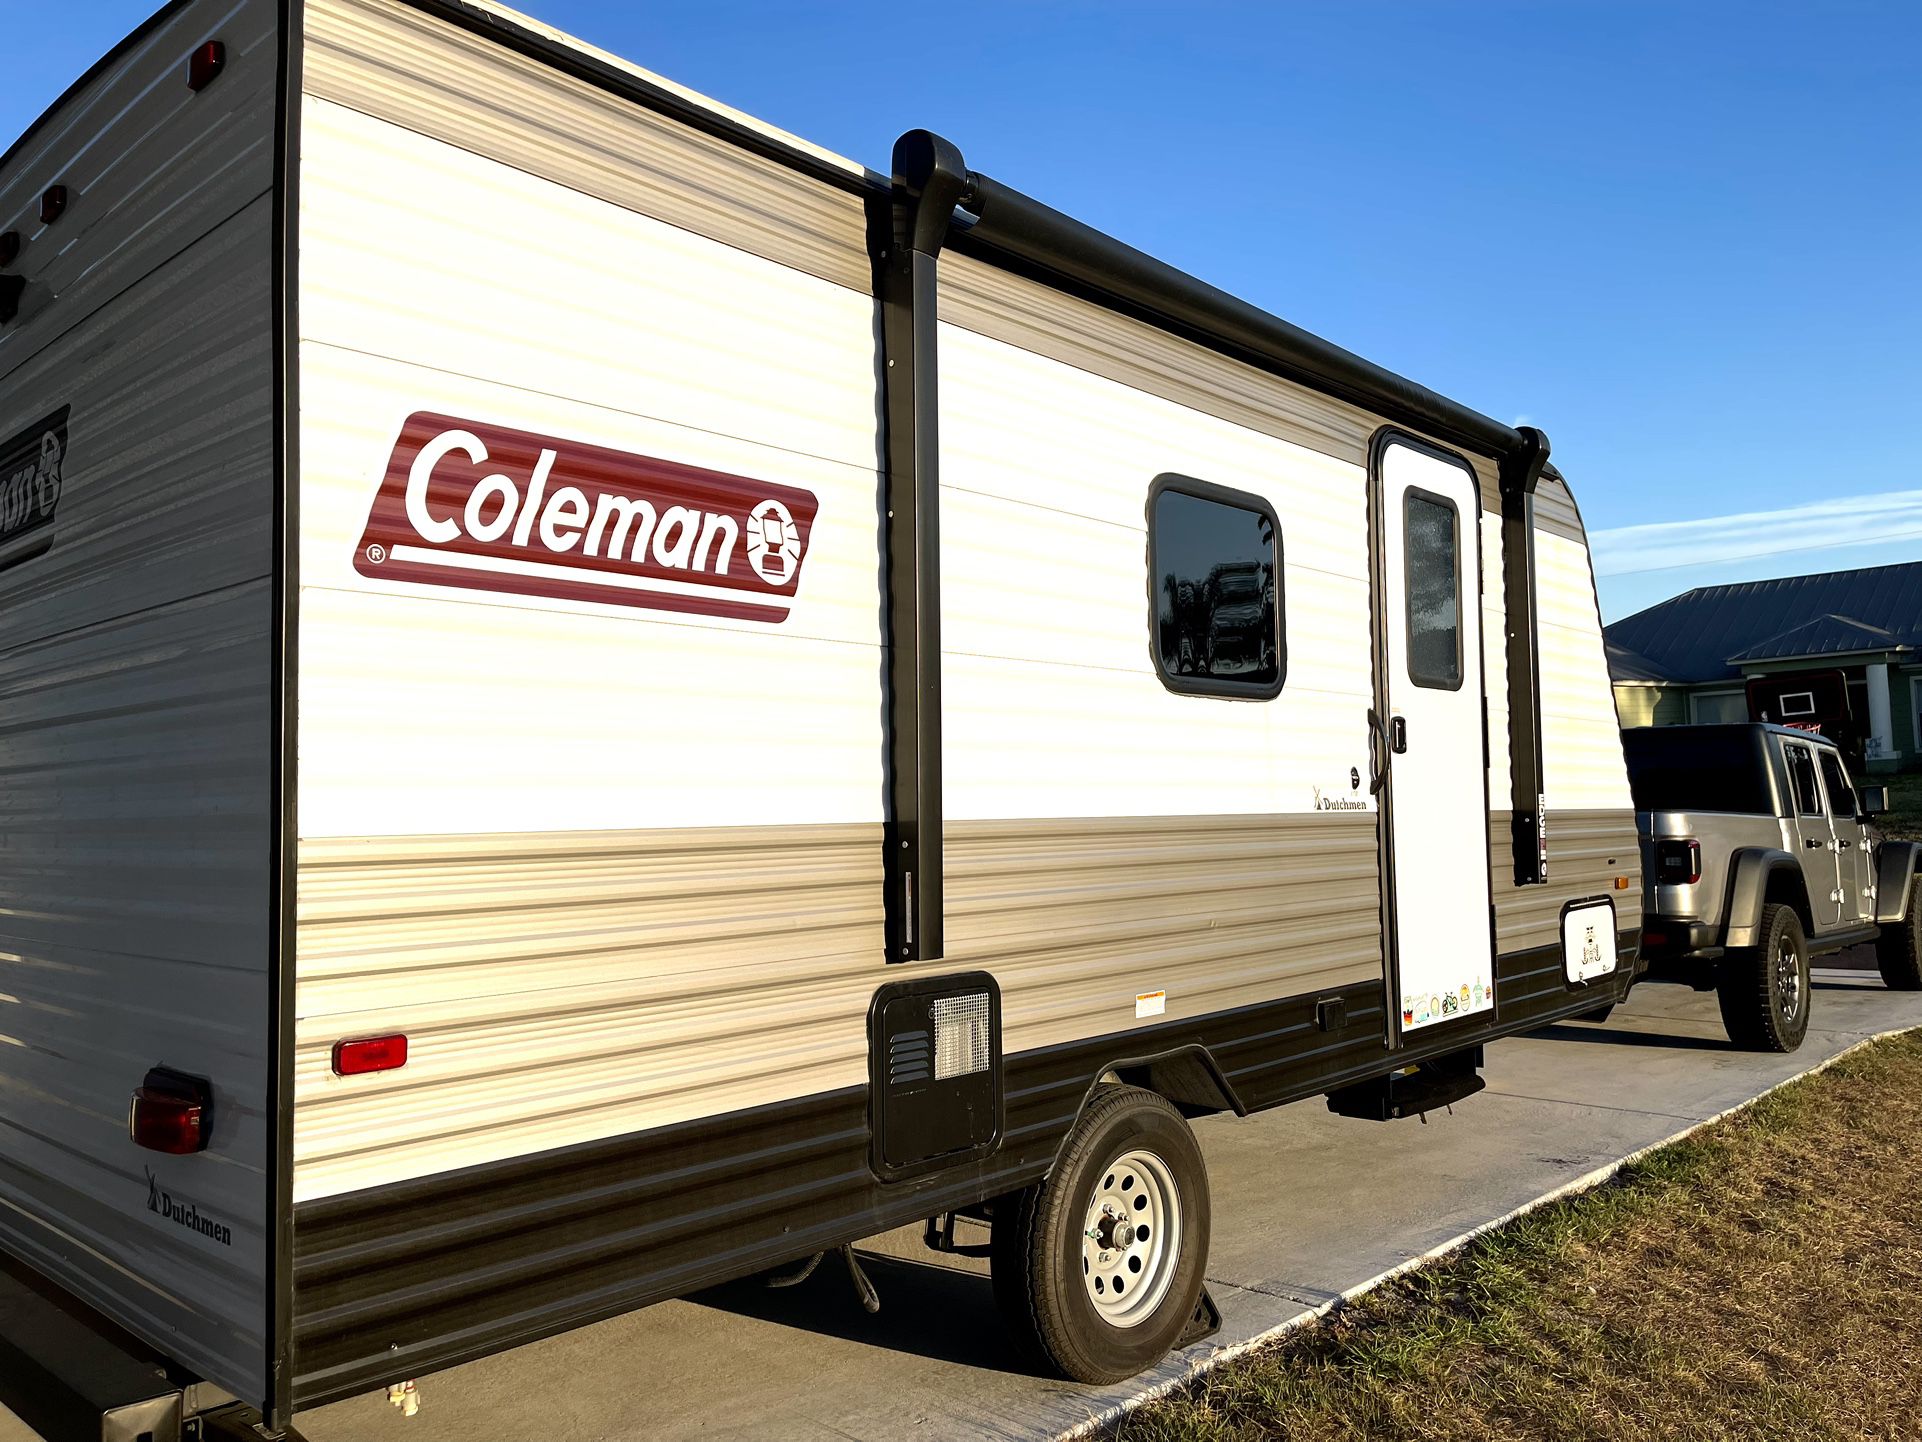 2022 RV Coleman 17B for rent